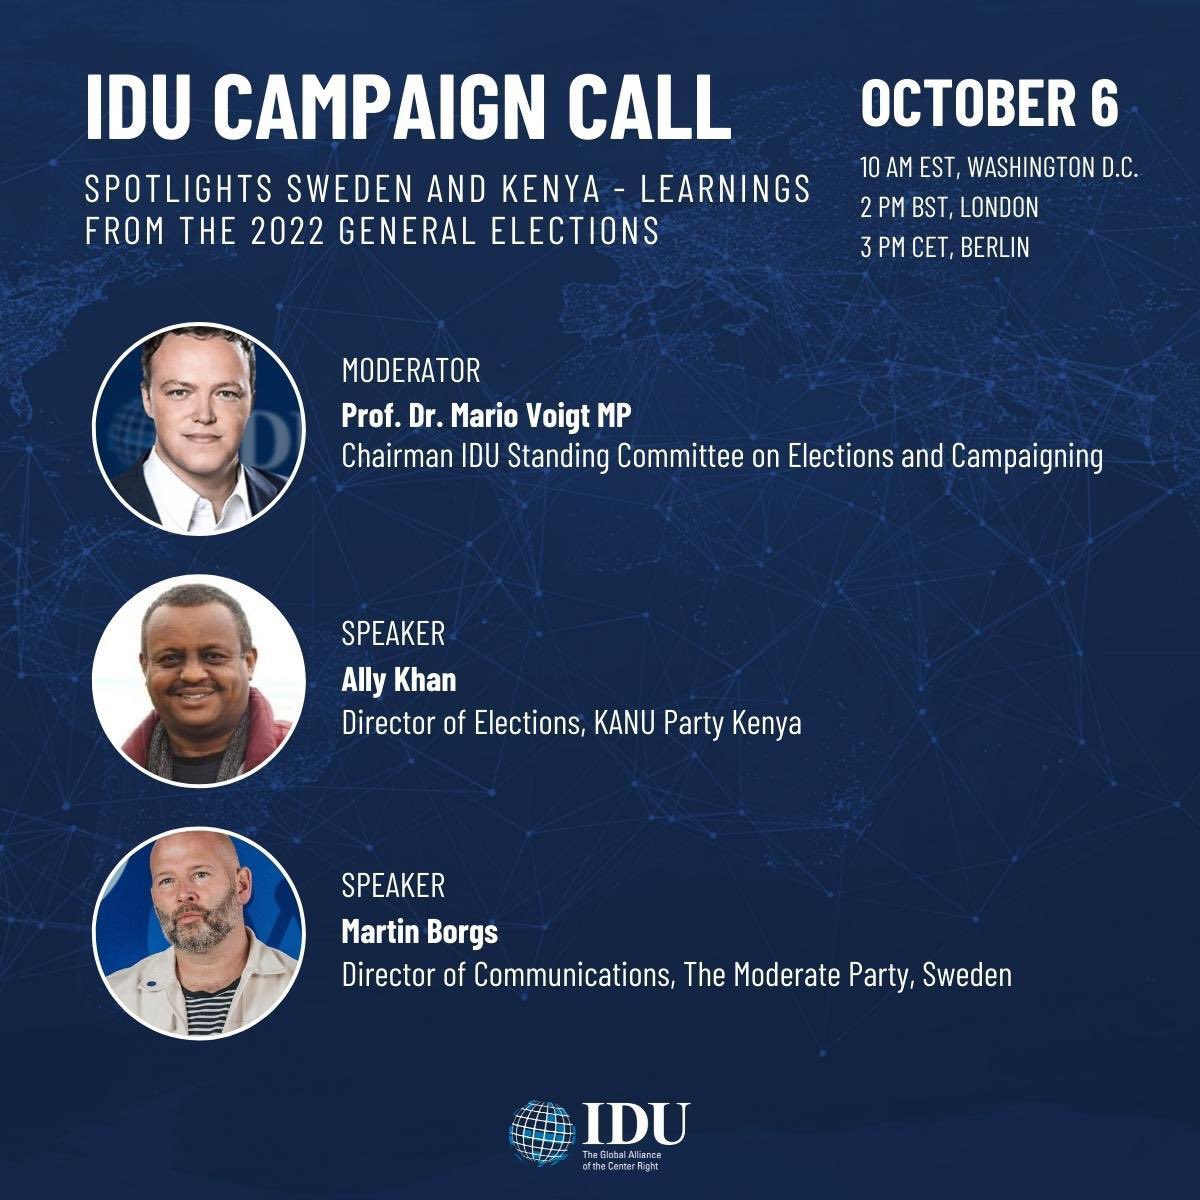 JOIN us next week for the IDU #Campaign Call with partners from #Kenya and #Sweden discussing the latest general #elections. 🗳 🇰🇪 🇸🇪